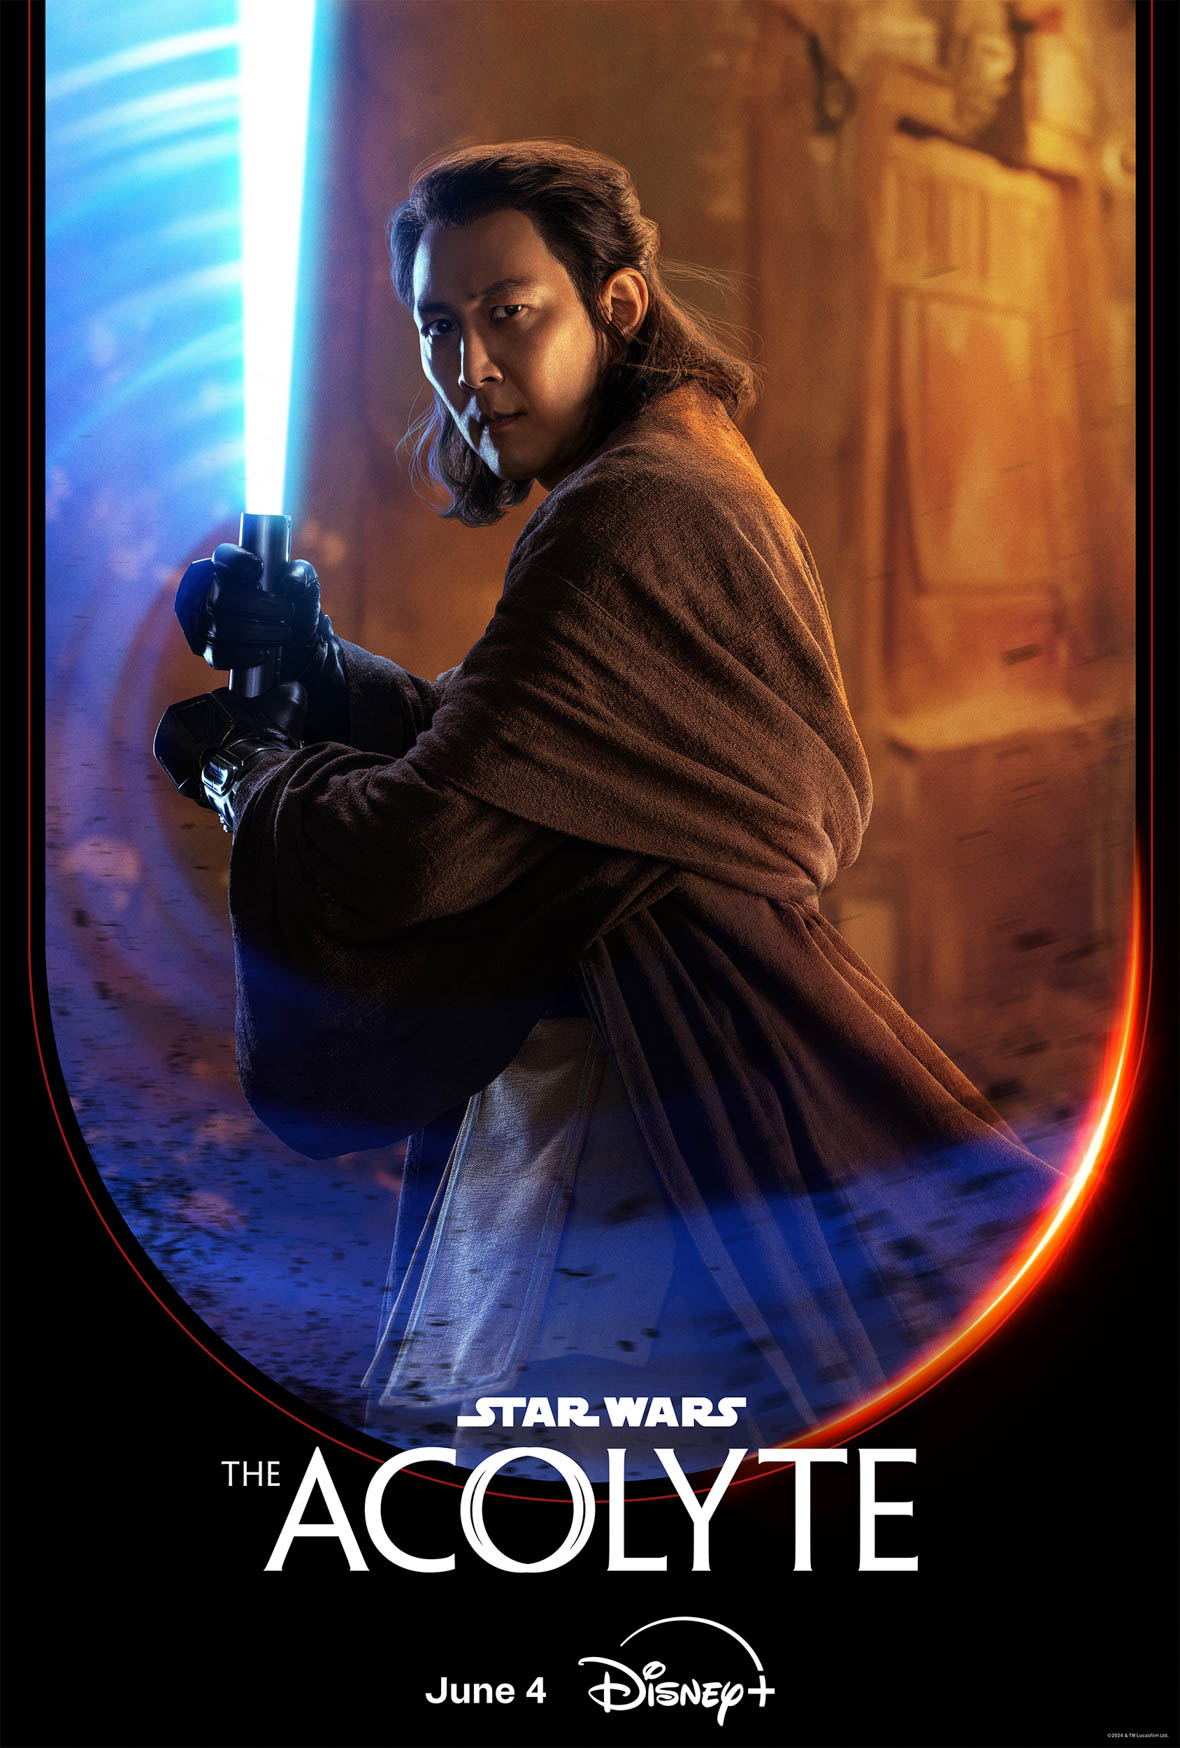 Jedi Master Sol holds his blue lightsaber with both hands, turned towards the camera as though preparing for an attack. A black border frames the bottom of the image with the logo for Star Wars: The Acolyte written in white font.